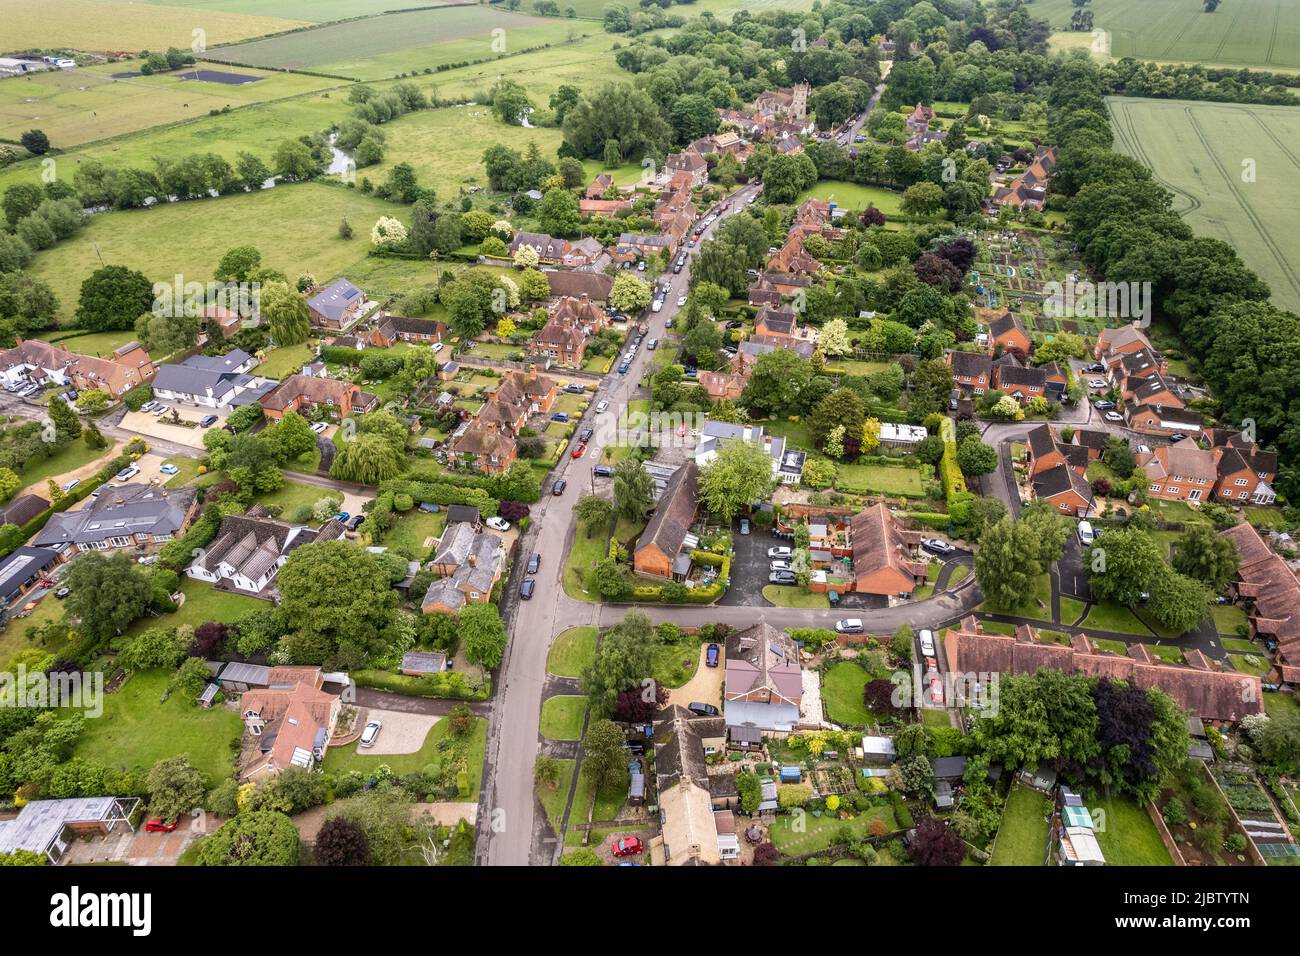 Picturesque village of Clifford Chambers, Warwickshire, UK. Stock Photo